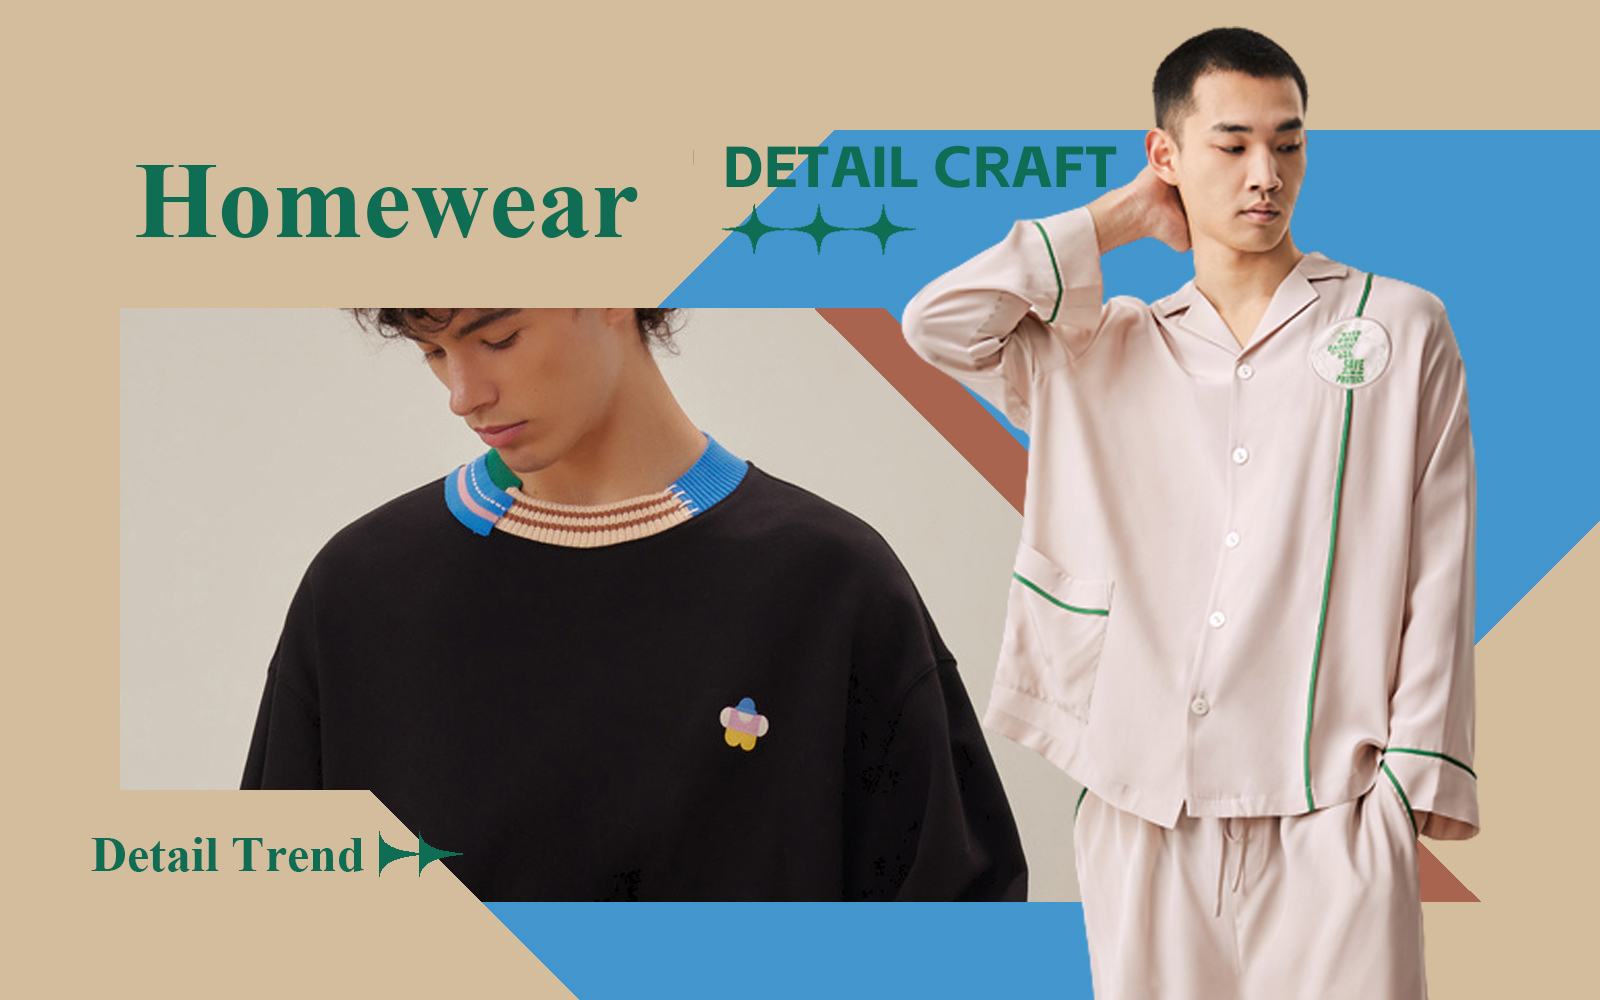 The Detail & Craft Trend for Men's Homewear